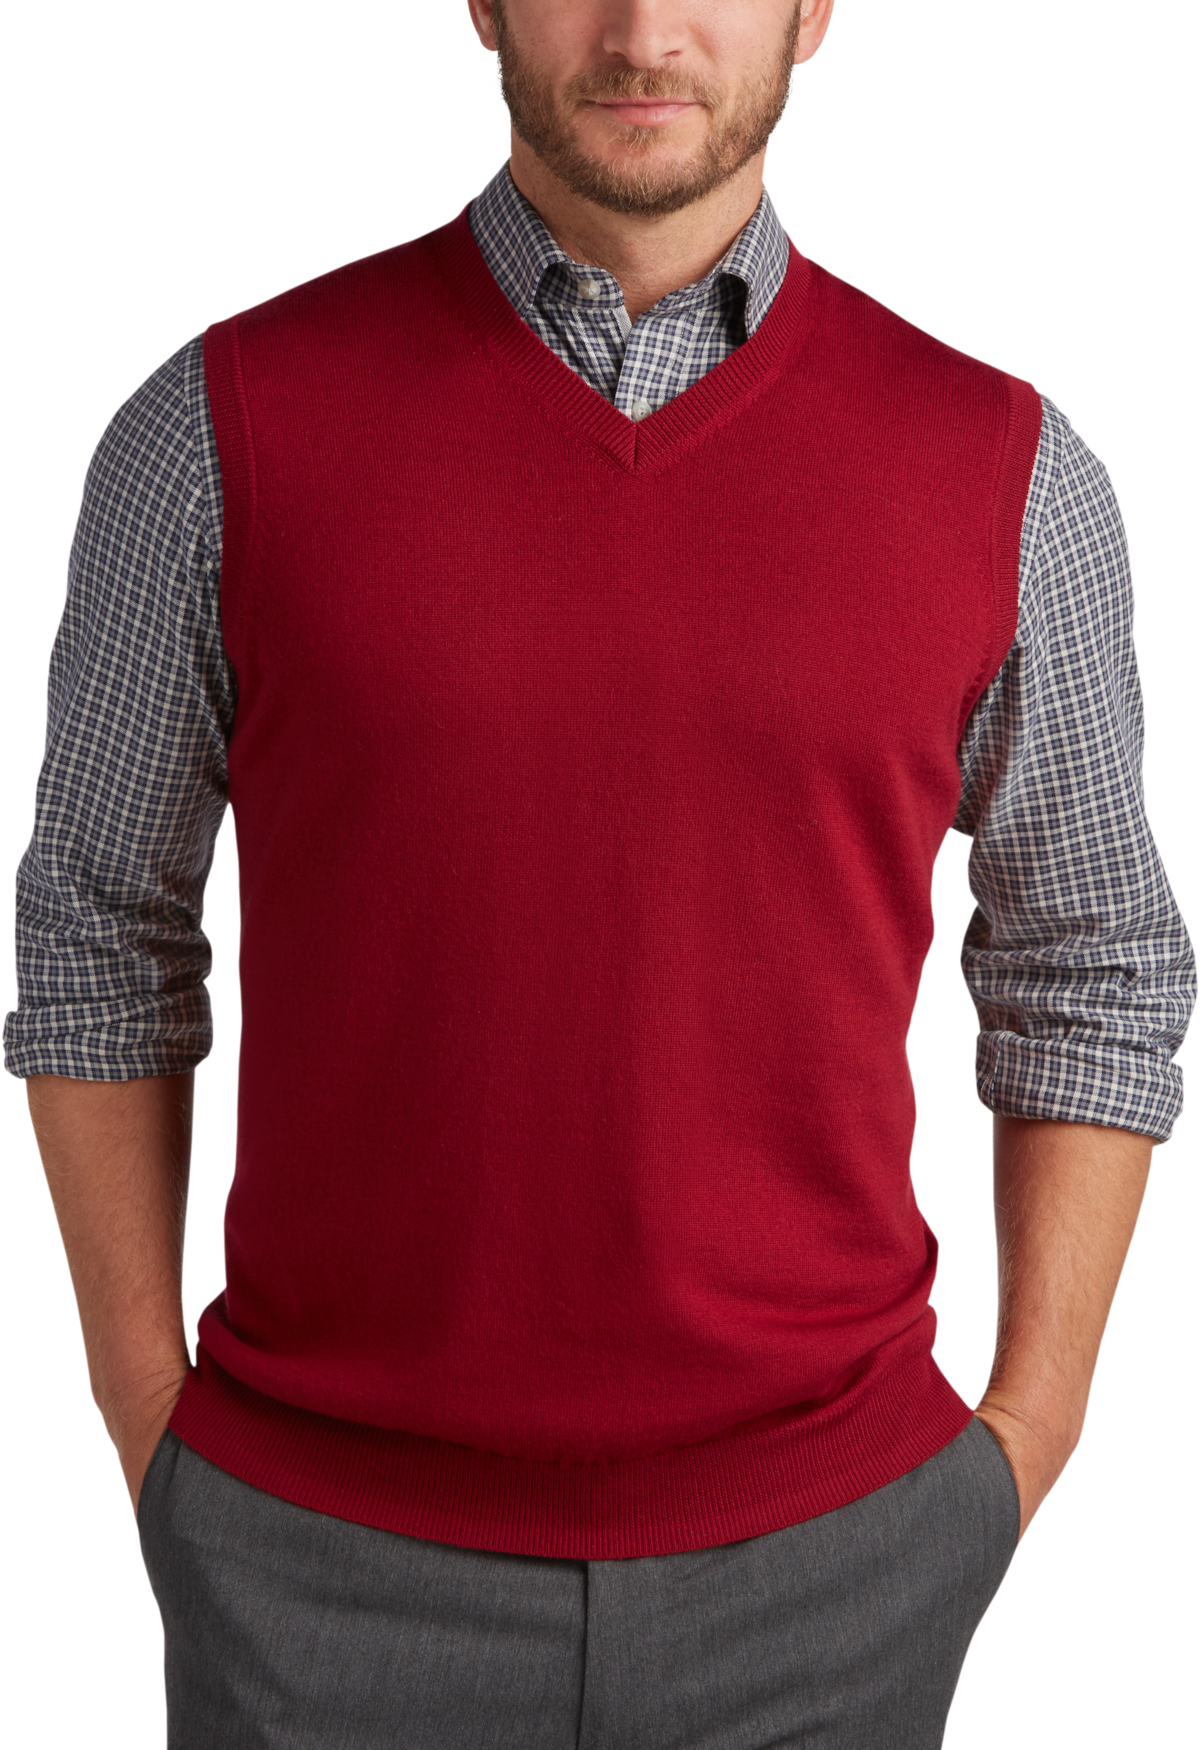 Mens sweater vests on sale trust forex trade investment group ltd vs individual ltd